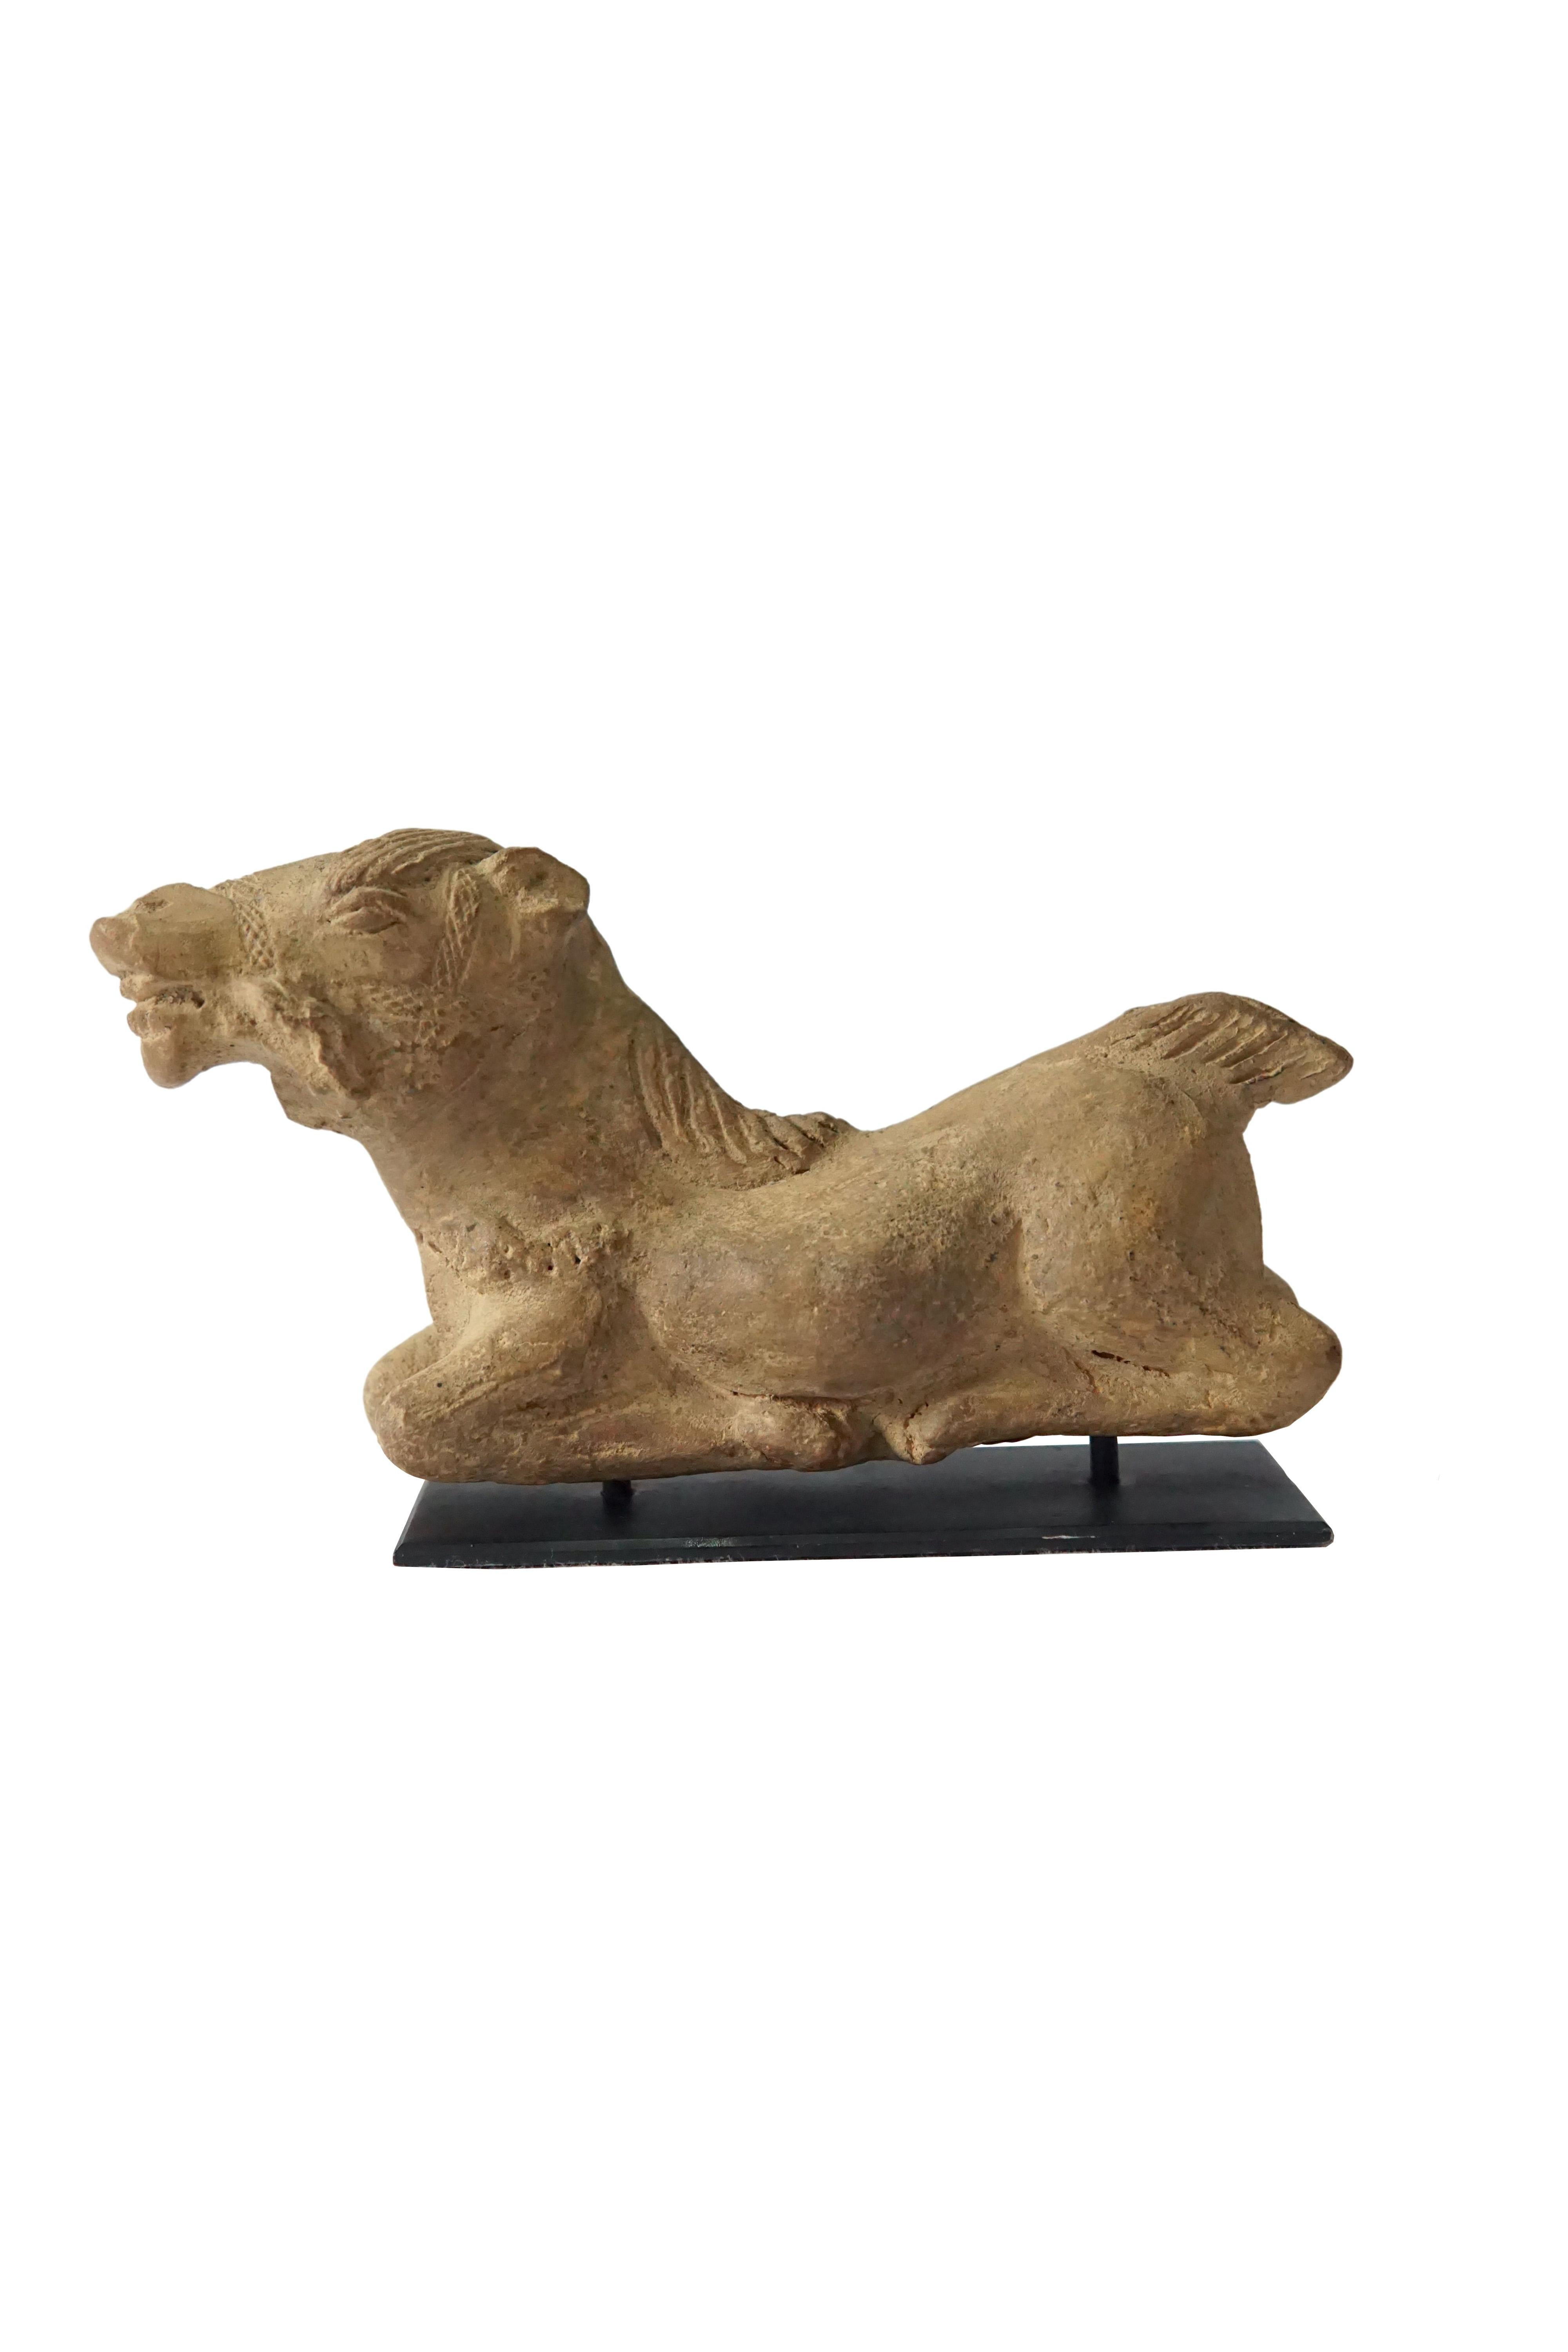 This Majapahit horse is crafted from terracota and is mounted on a stand. It was excavated amongst the shrines of Mount Penganggungan, East Java, Indonesia. Terracotta pottery was an important craft during the Majapahit era. This horse still